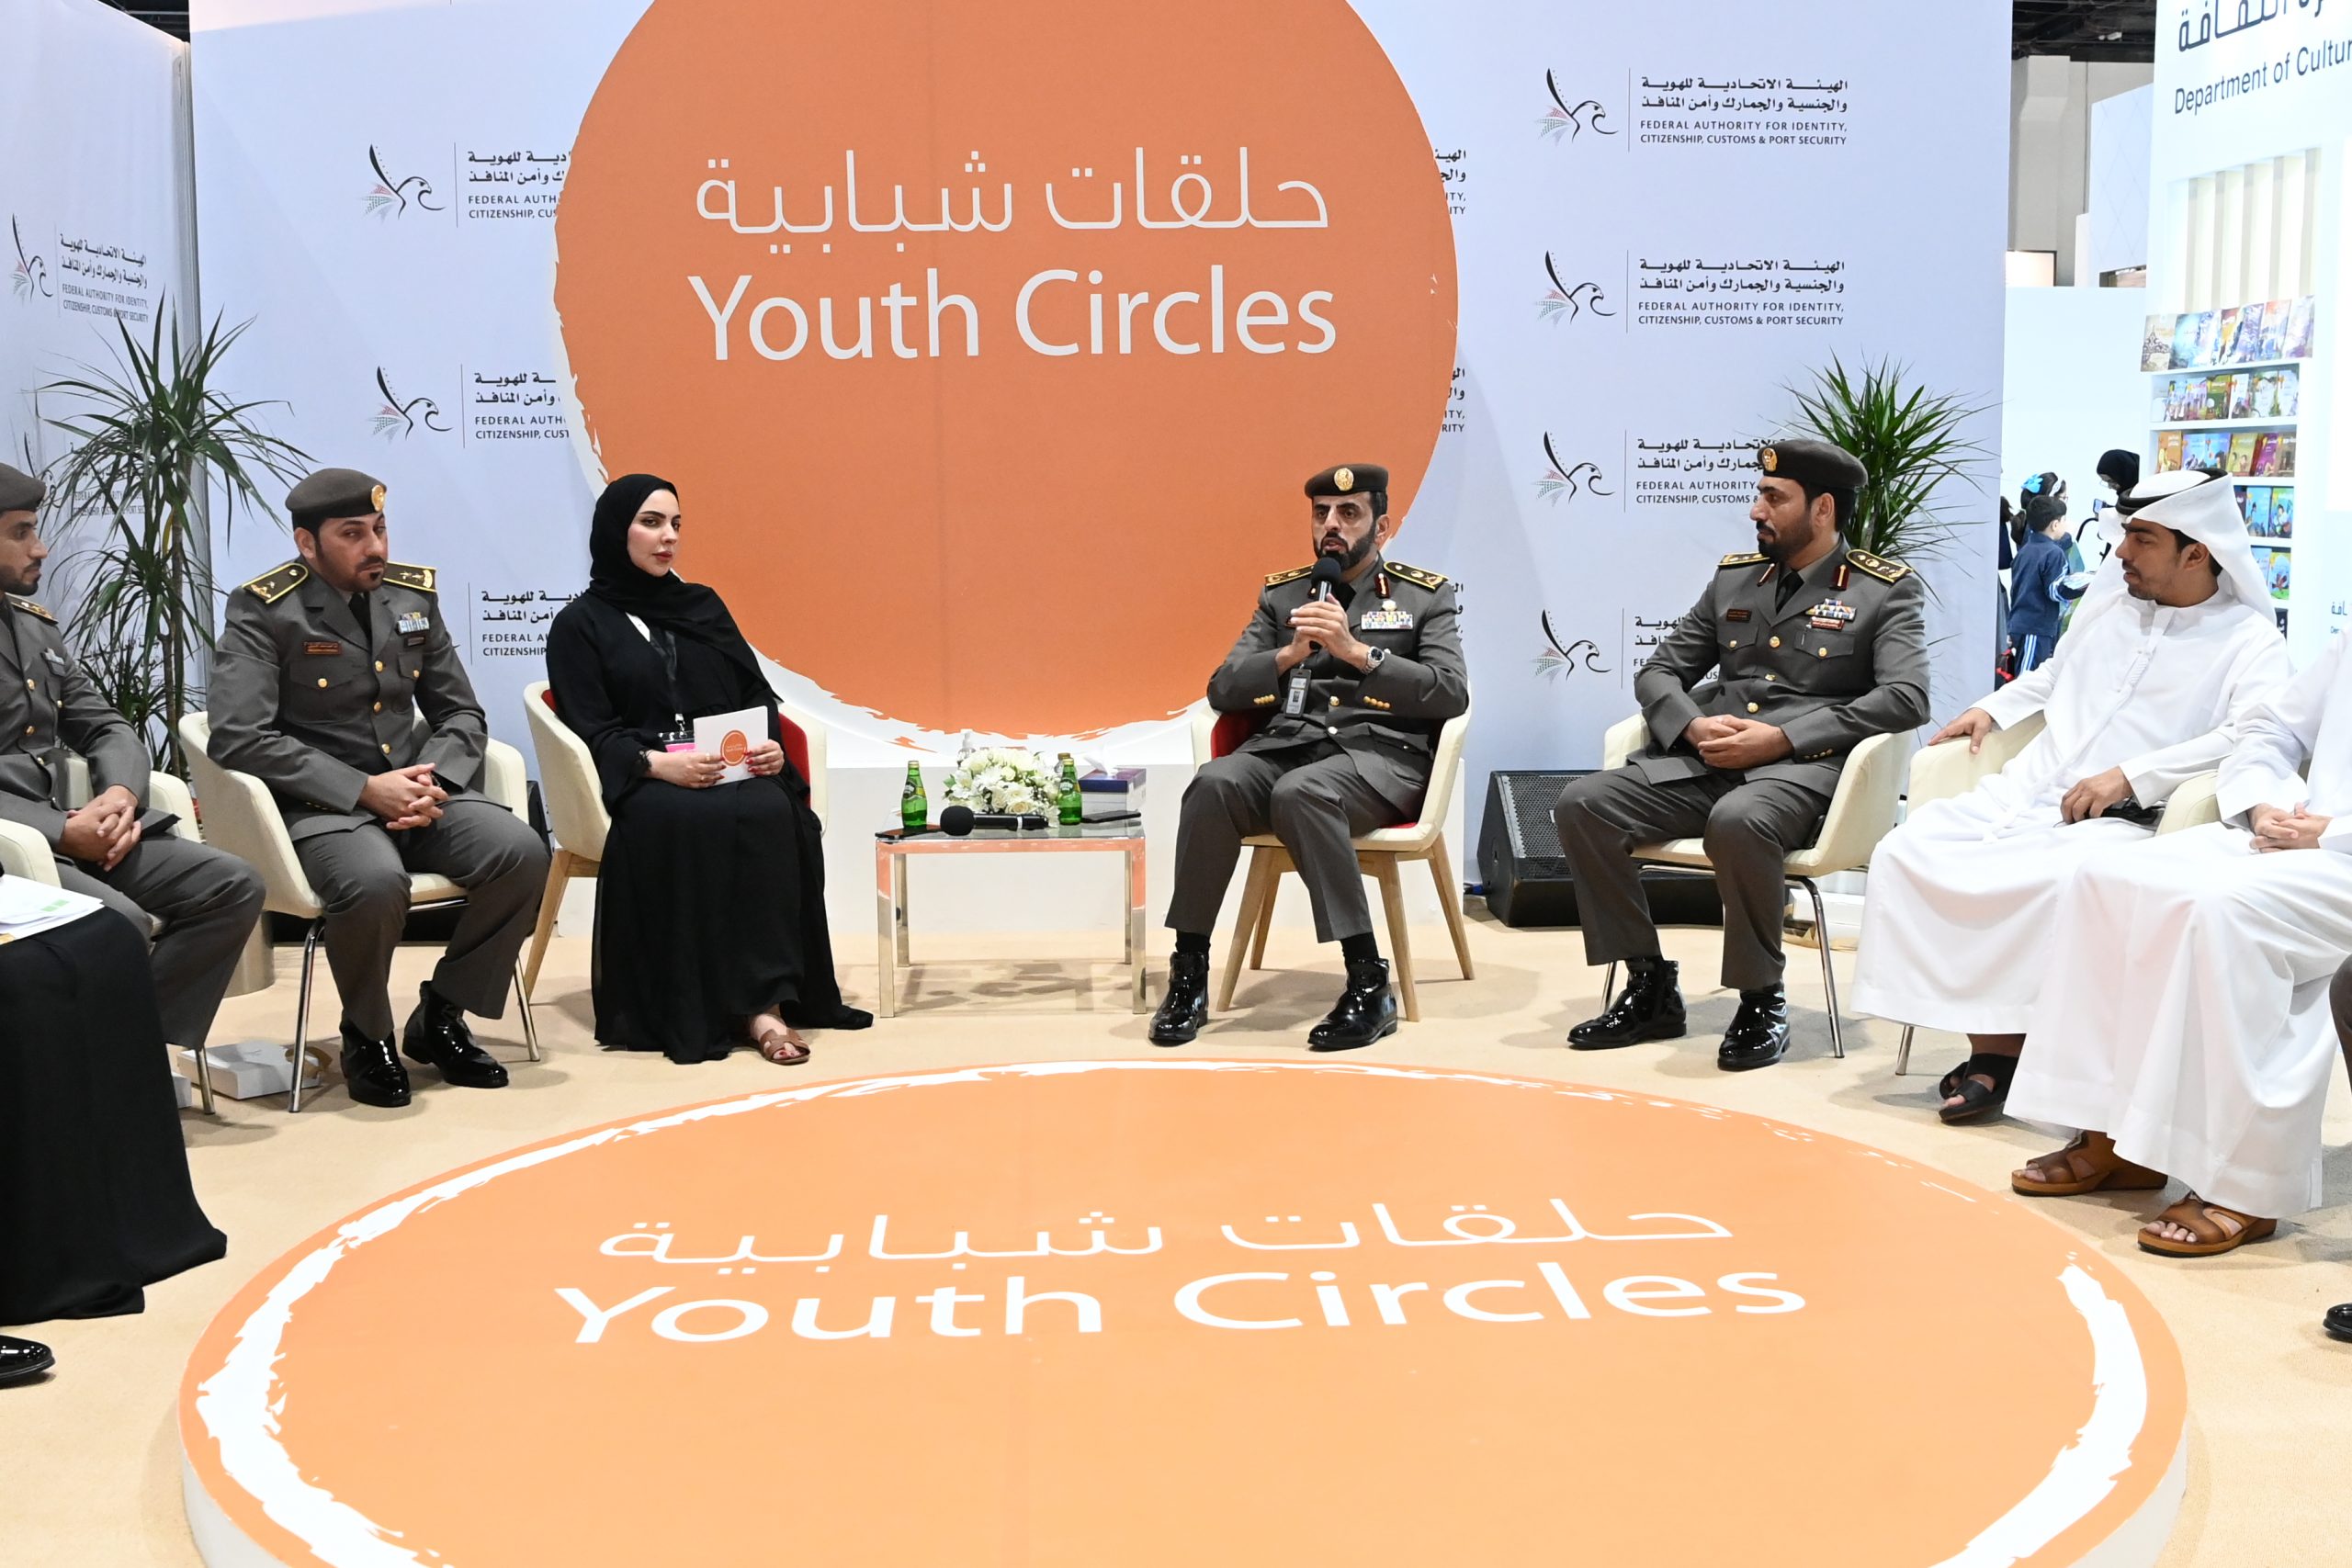 “Identity and Citizenship” holds “youth” sessions in Abu Dhabi International Book Fair